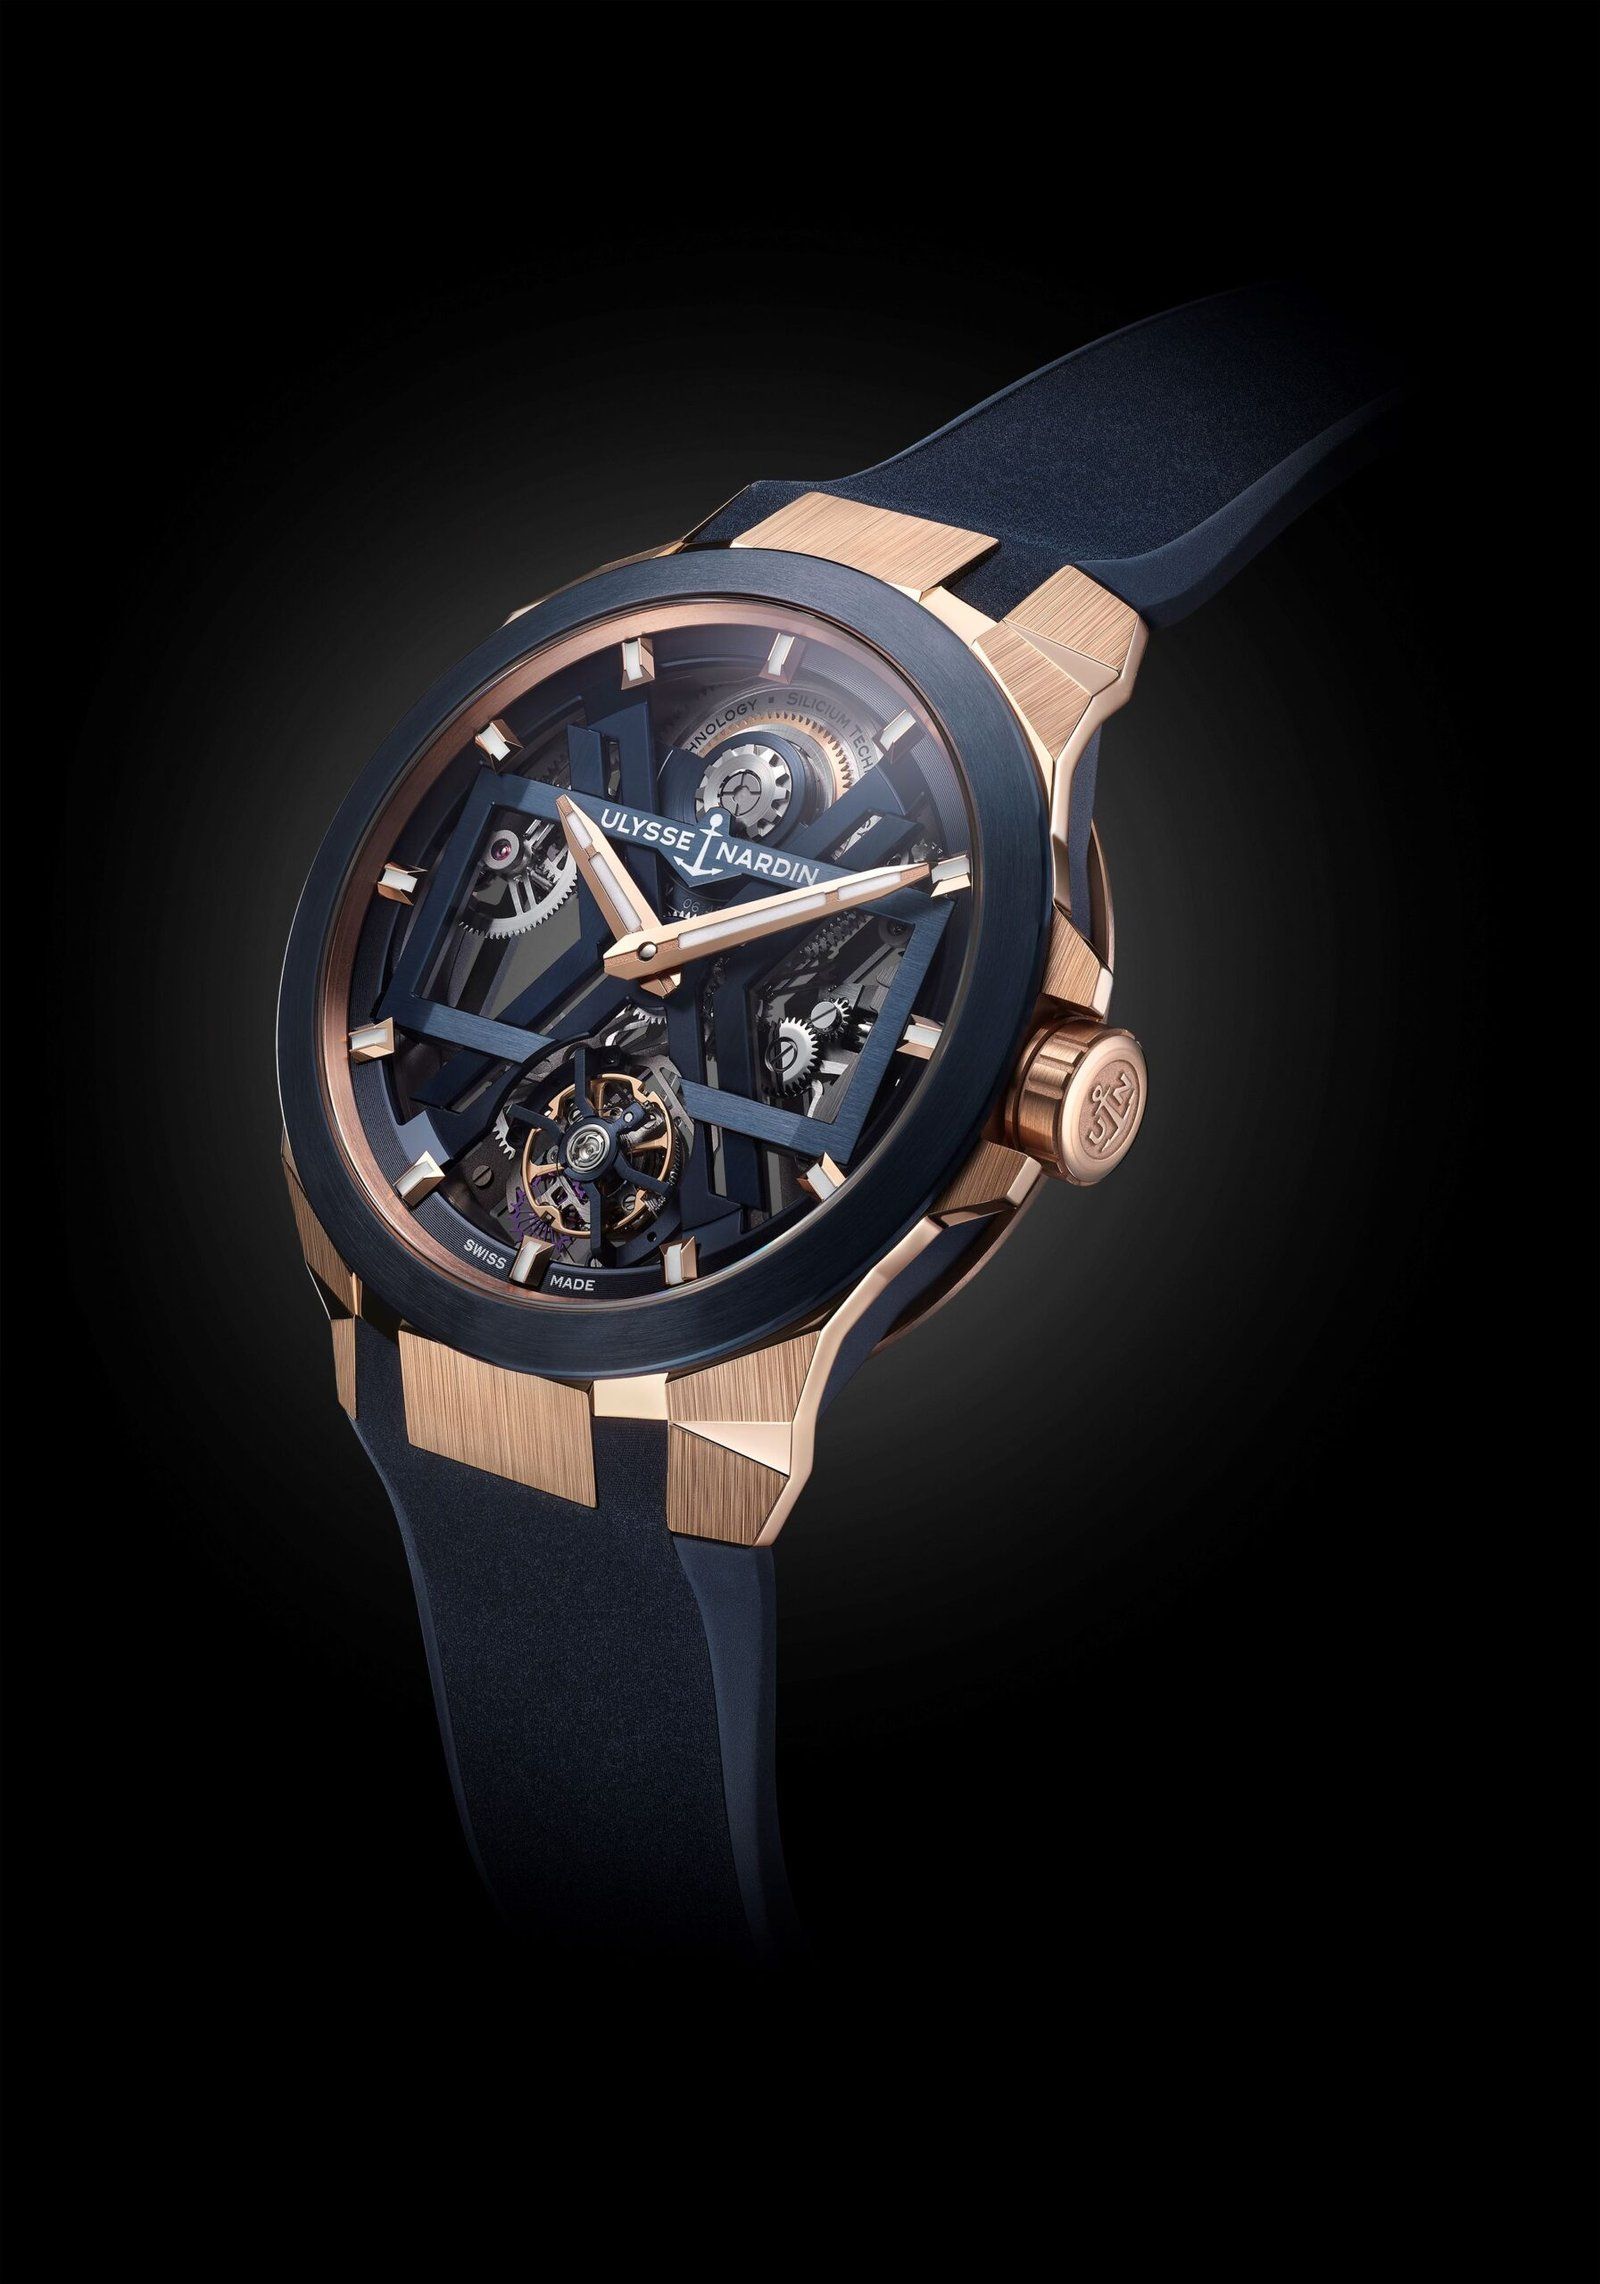 The Blast Tourbillon Blue & Gold marks the first-ever fusion of fiery rose gold and blue